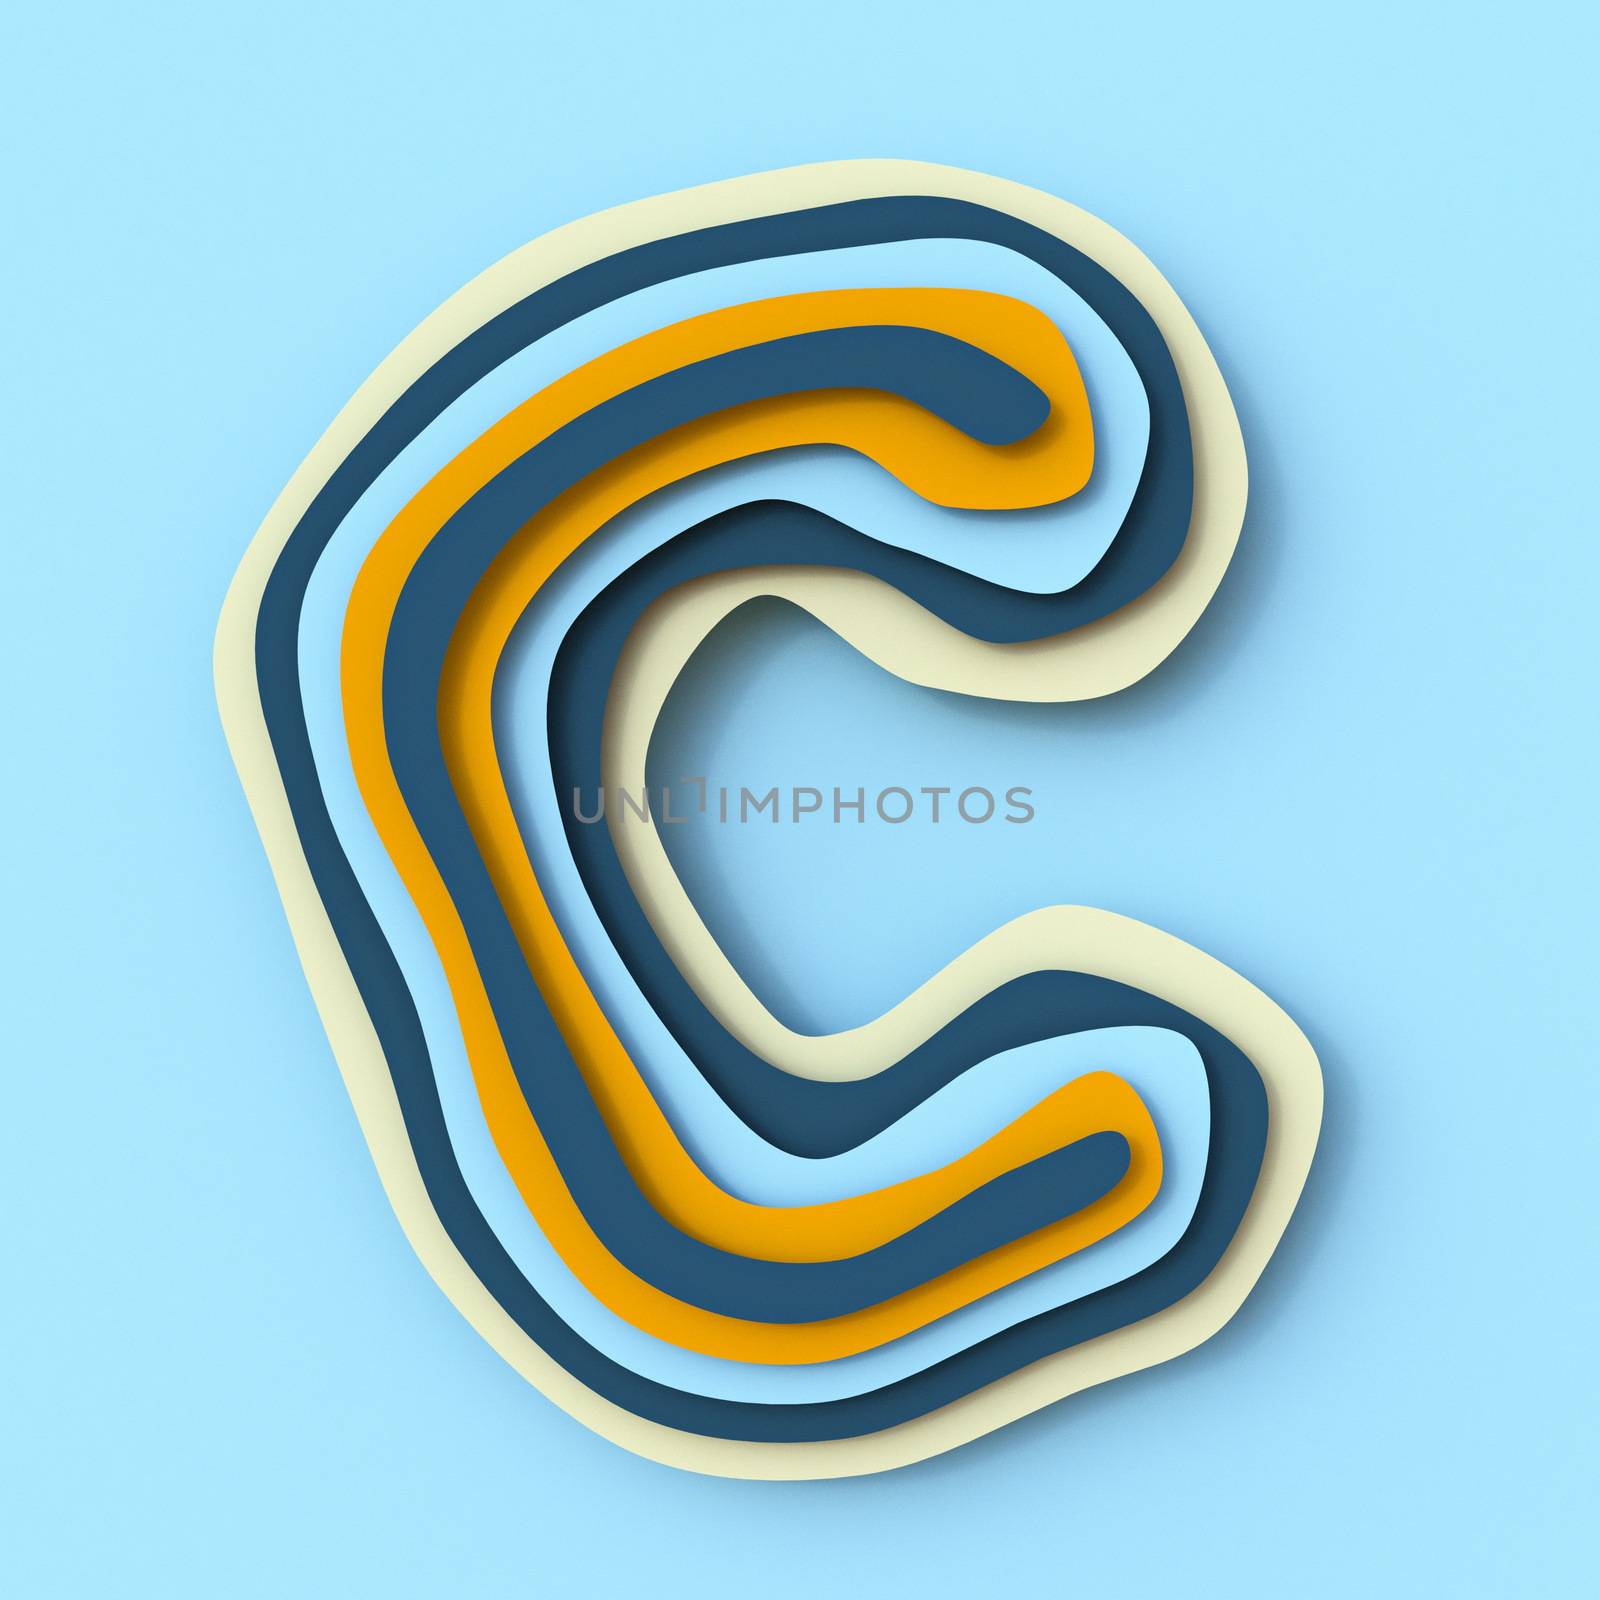 Colorful paper layers font Letter C 3D render illustration isolated on blue background